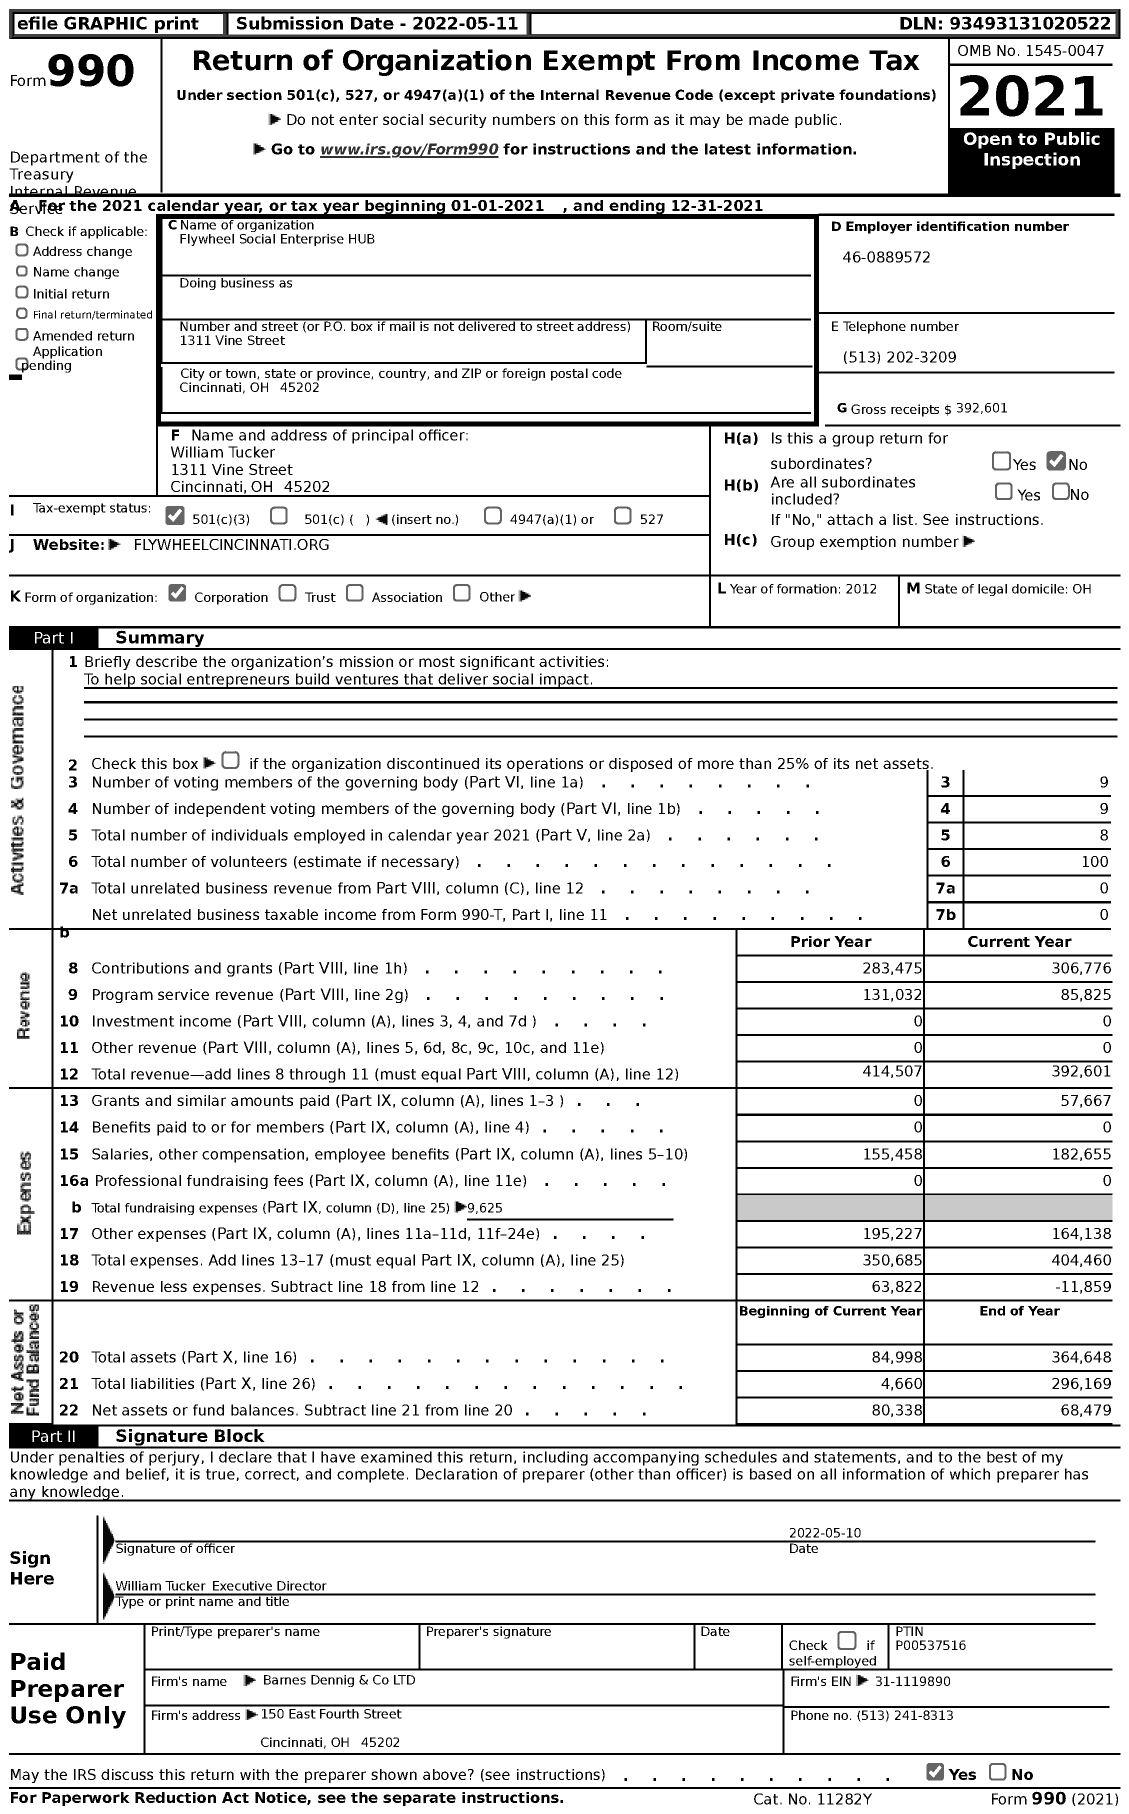 Image of first page of 2021 Form 990 for Flywheel Social Enterprise HUB